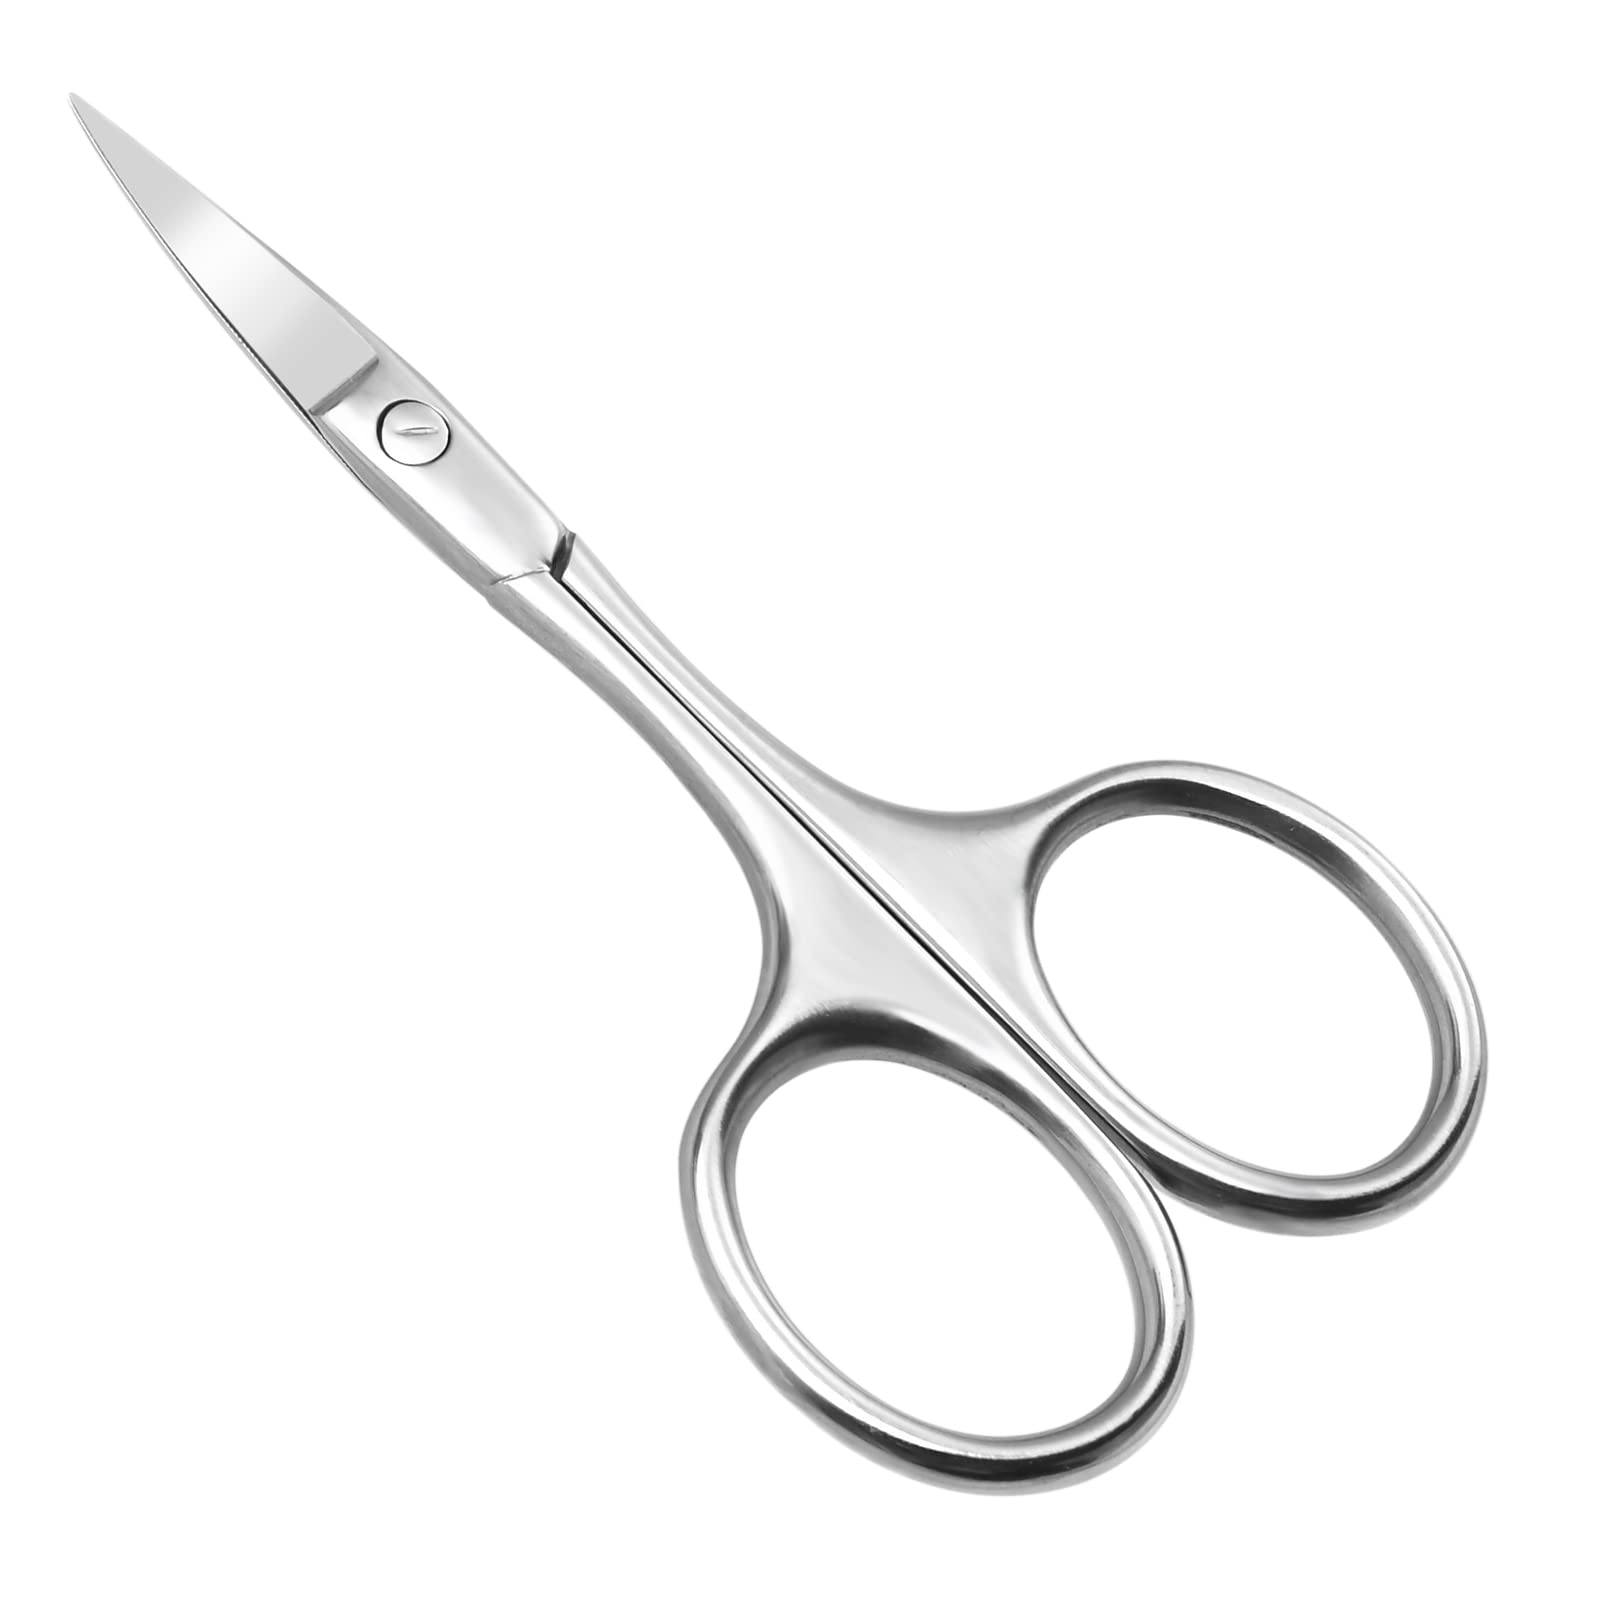 Onlylove Stainless steel beauty scissors, Pointed Household Beauty Scissors, Suitable for Trimming Eyebrows, Nose Hair, Beard, Silver